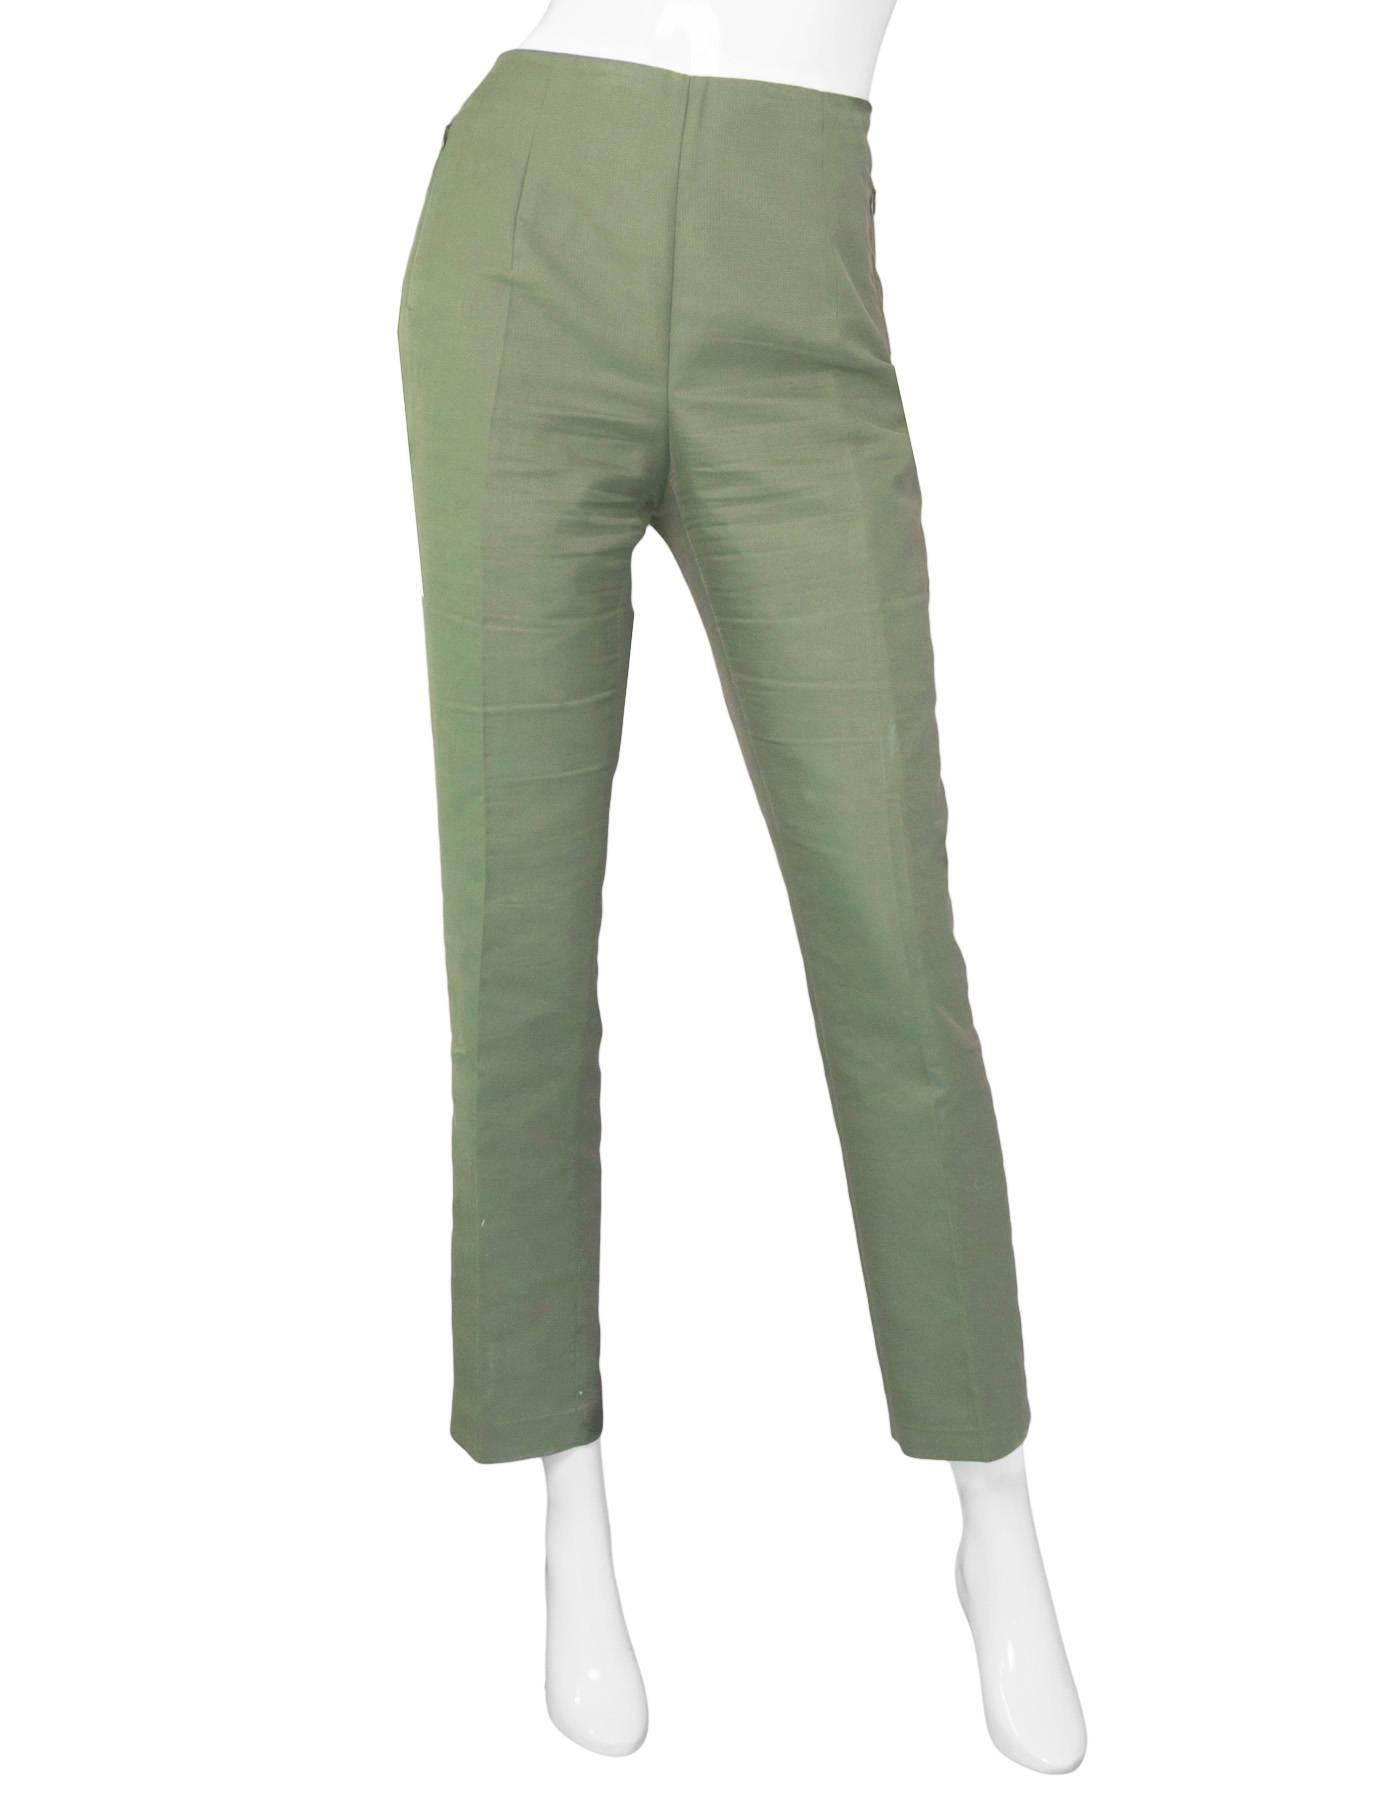 Akris Green Cropped Pants Sz 10

Made In: Romania
Color: Green
Composition: 59% cotton, 39% silk, 2% nylon
Lining: None
Closure/Opening: Hidden side zip and button closure
Exterior Pockets: Zip pockets at hips
Overall Condition: Excellent pre-owned